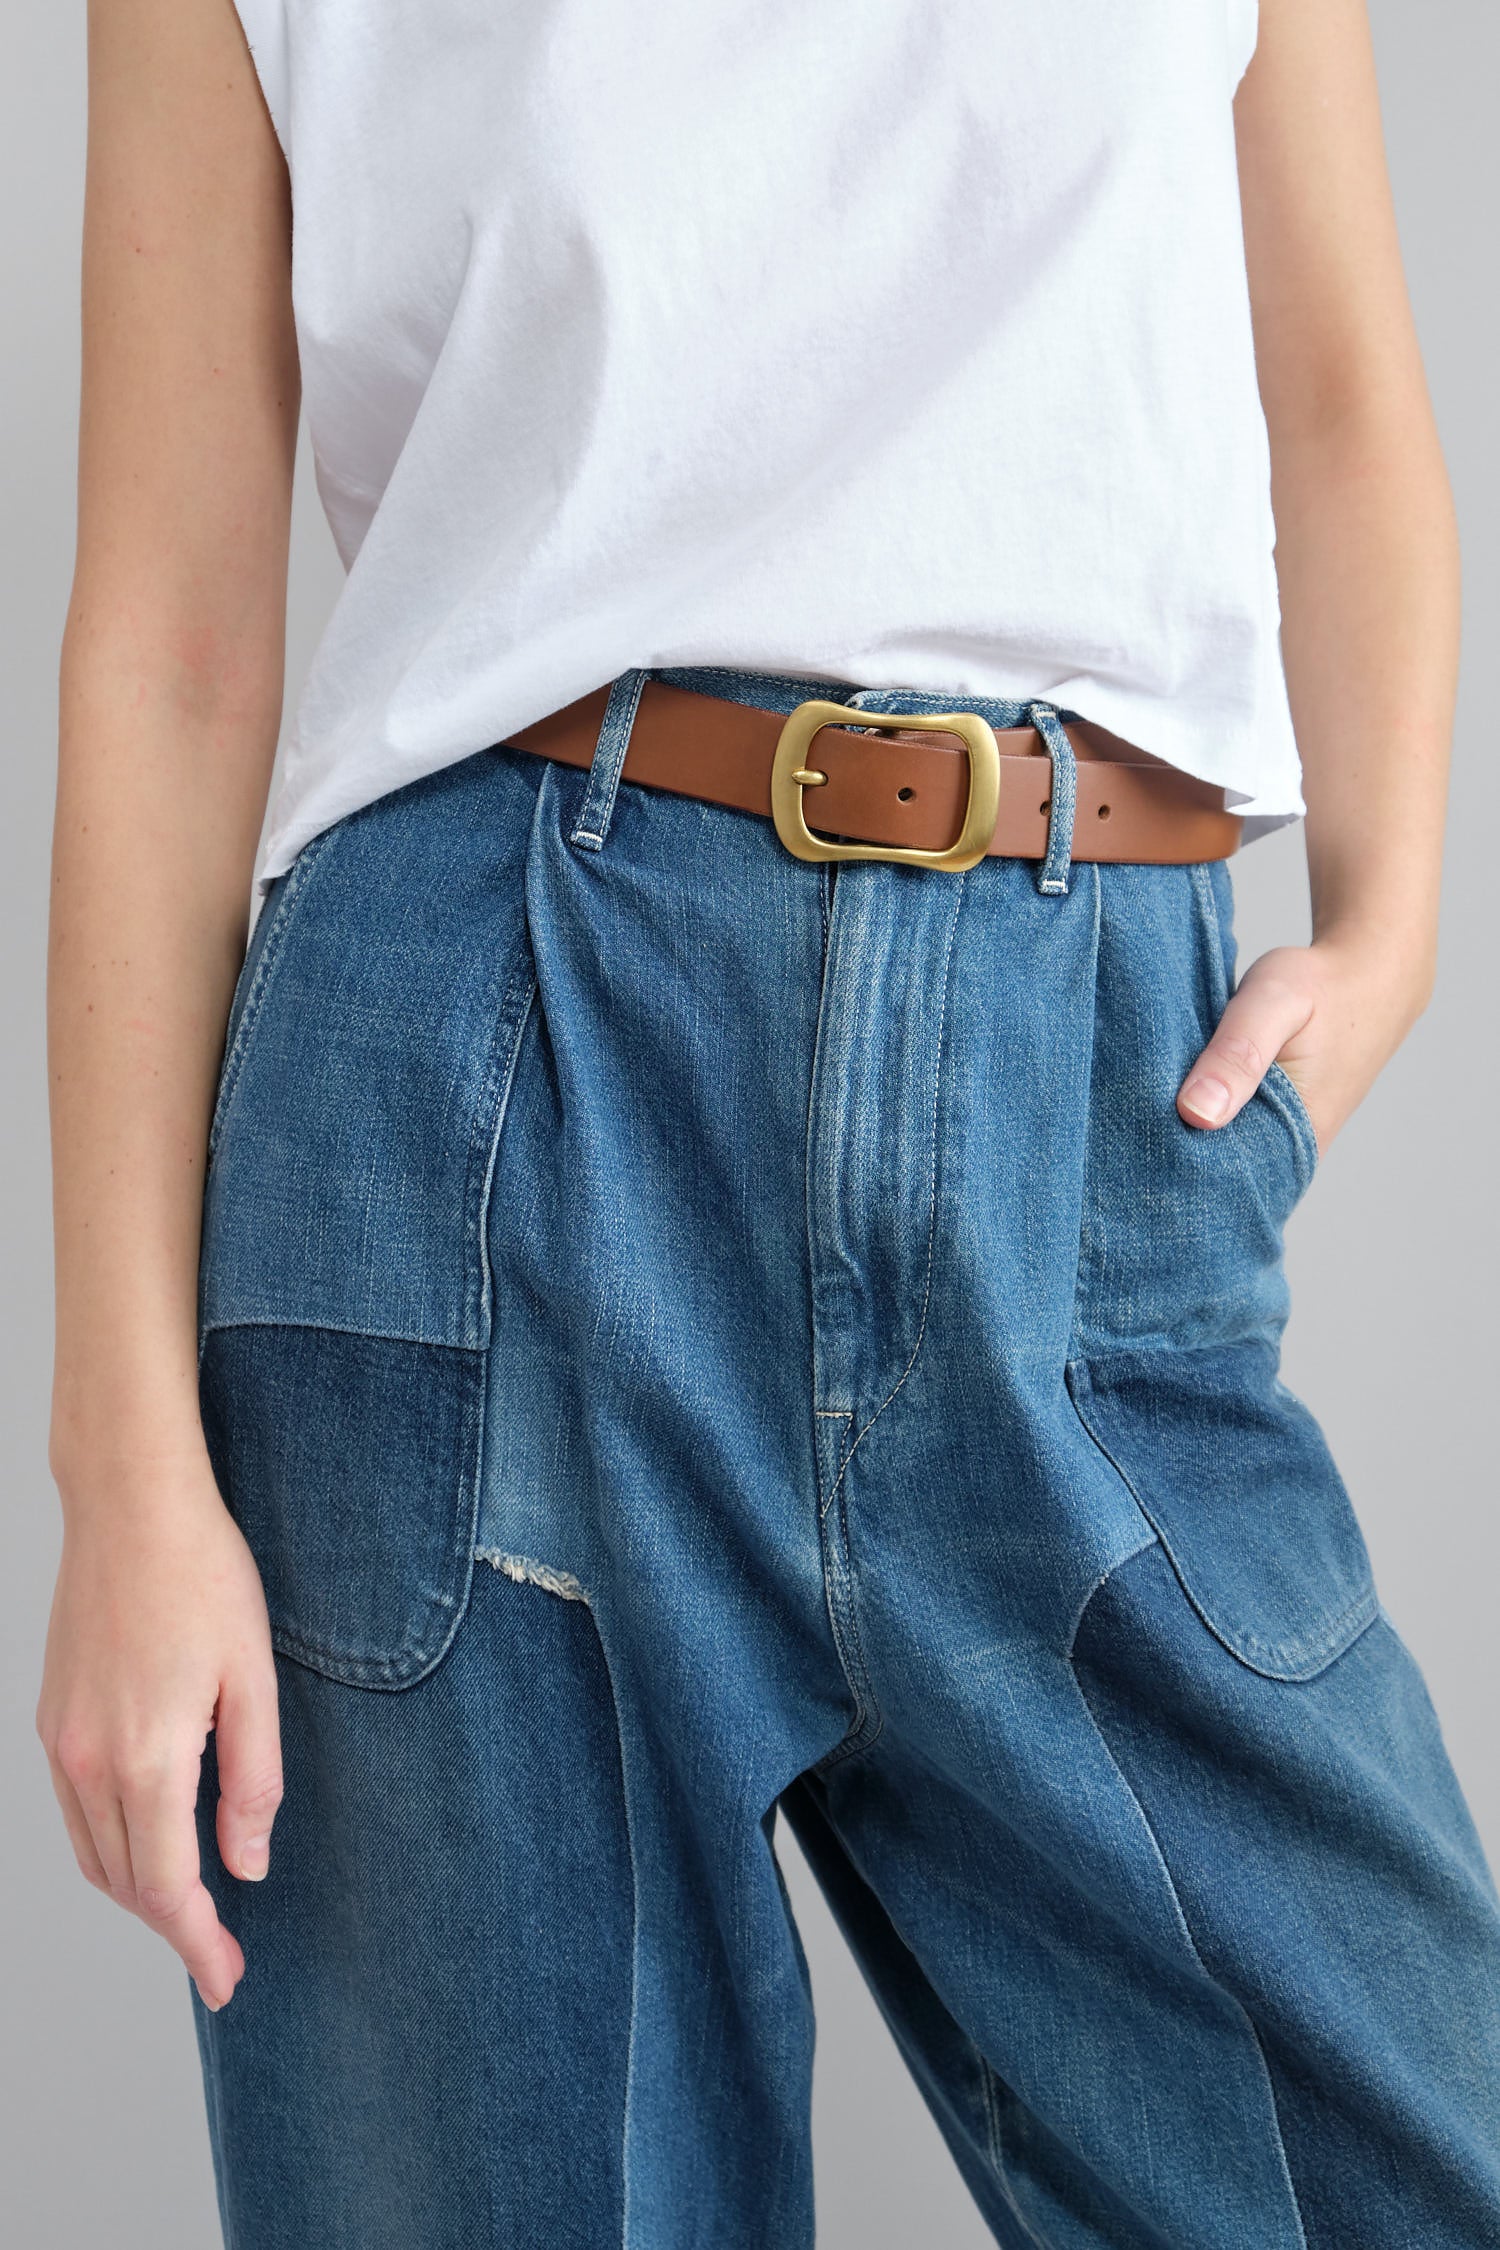 No. 8 Belt in Tan on the body